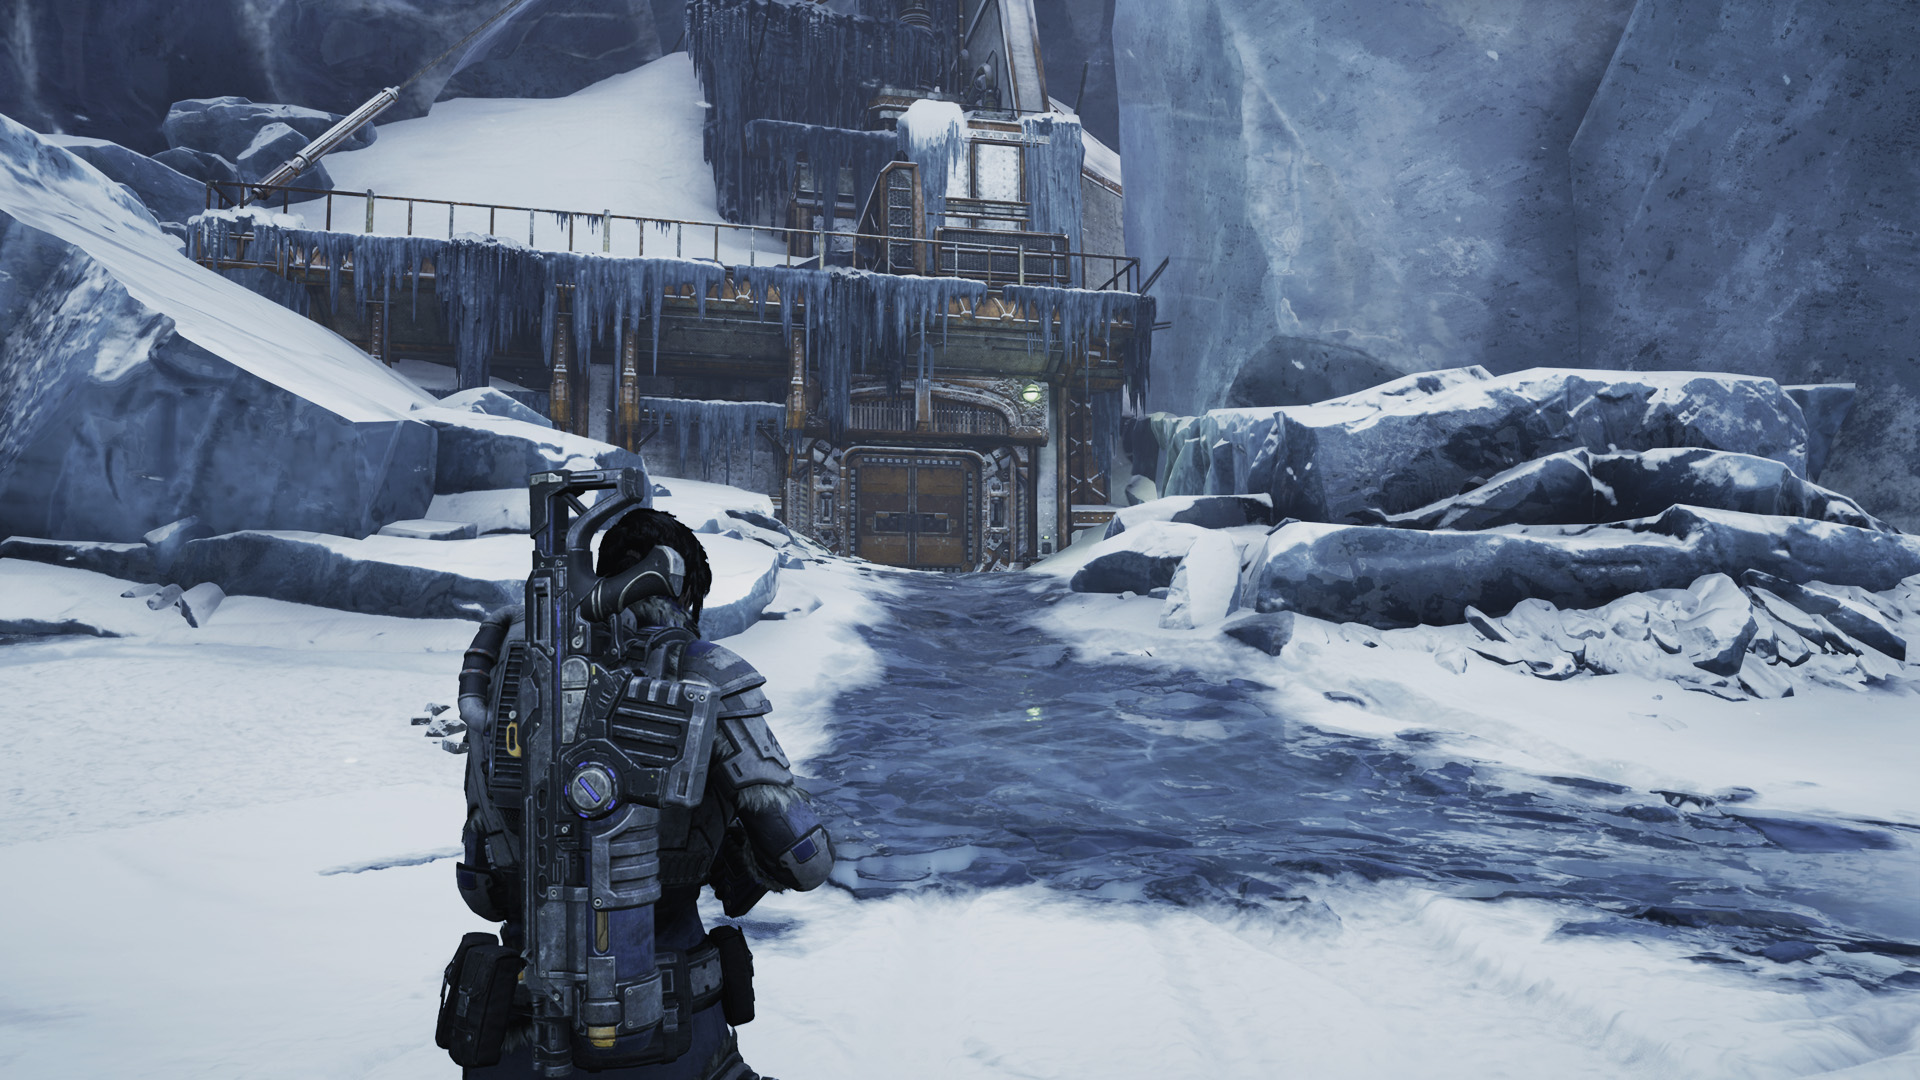 Gears 5 Act 2 – Chapter 4 The Source of It All East Comm Tower Substation 